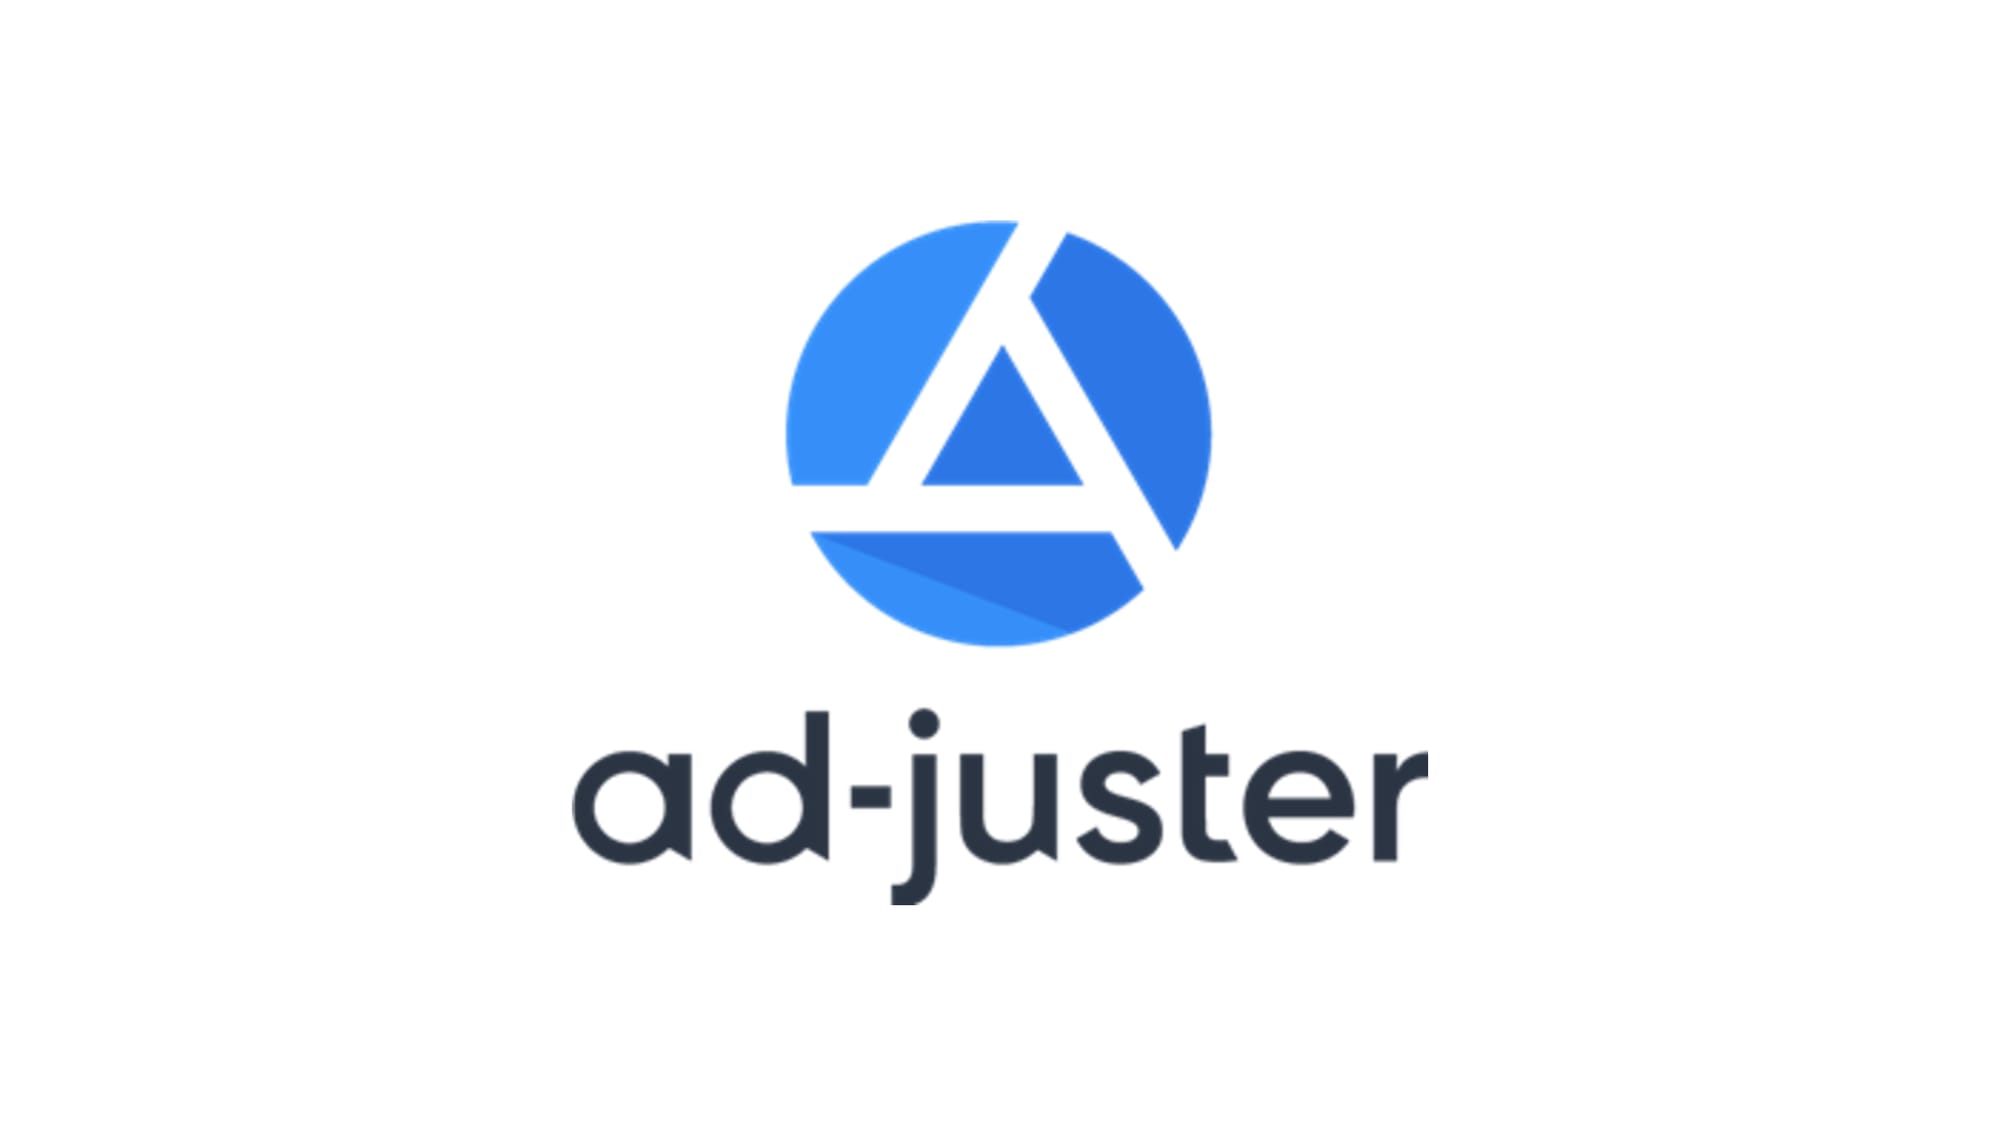 Ad-Juster gives a 33% discount to publishers due to coronavirus pandemic